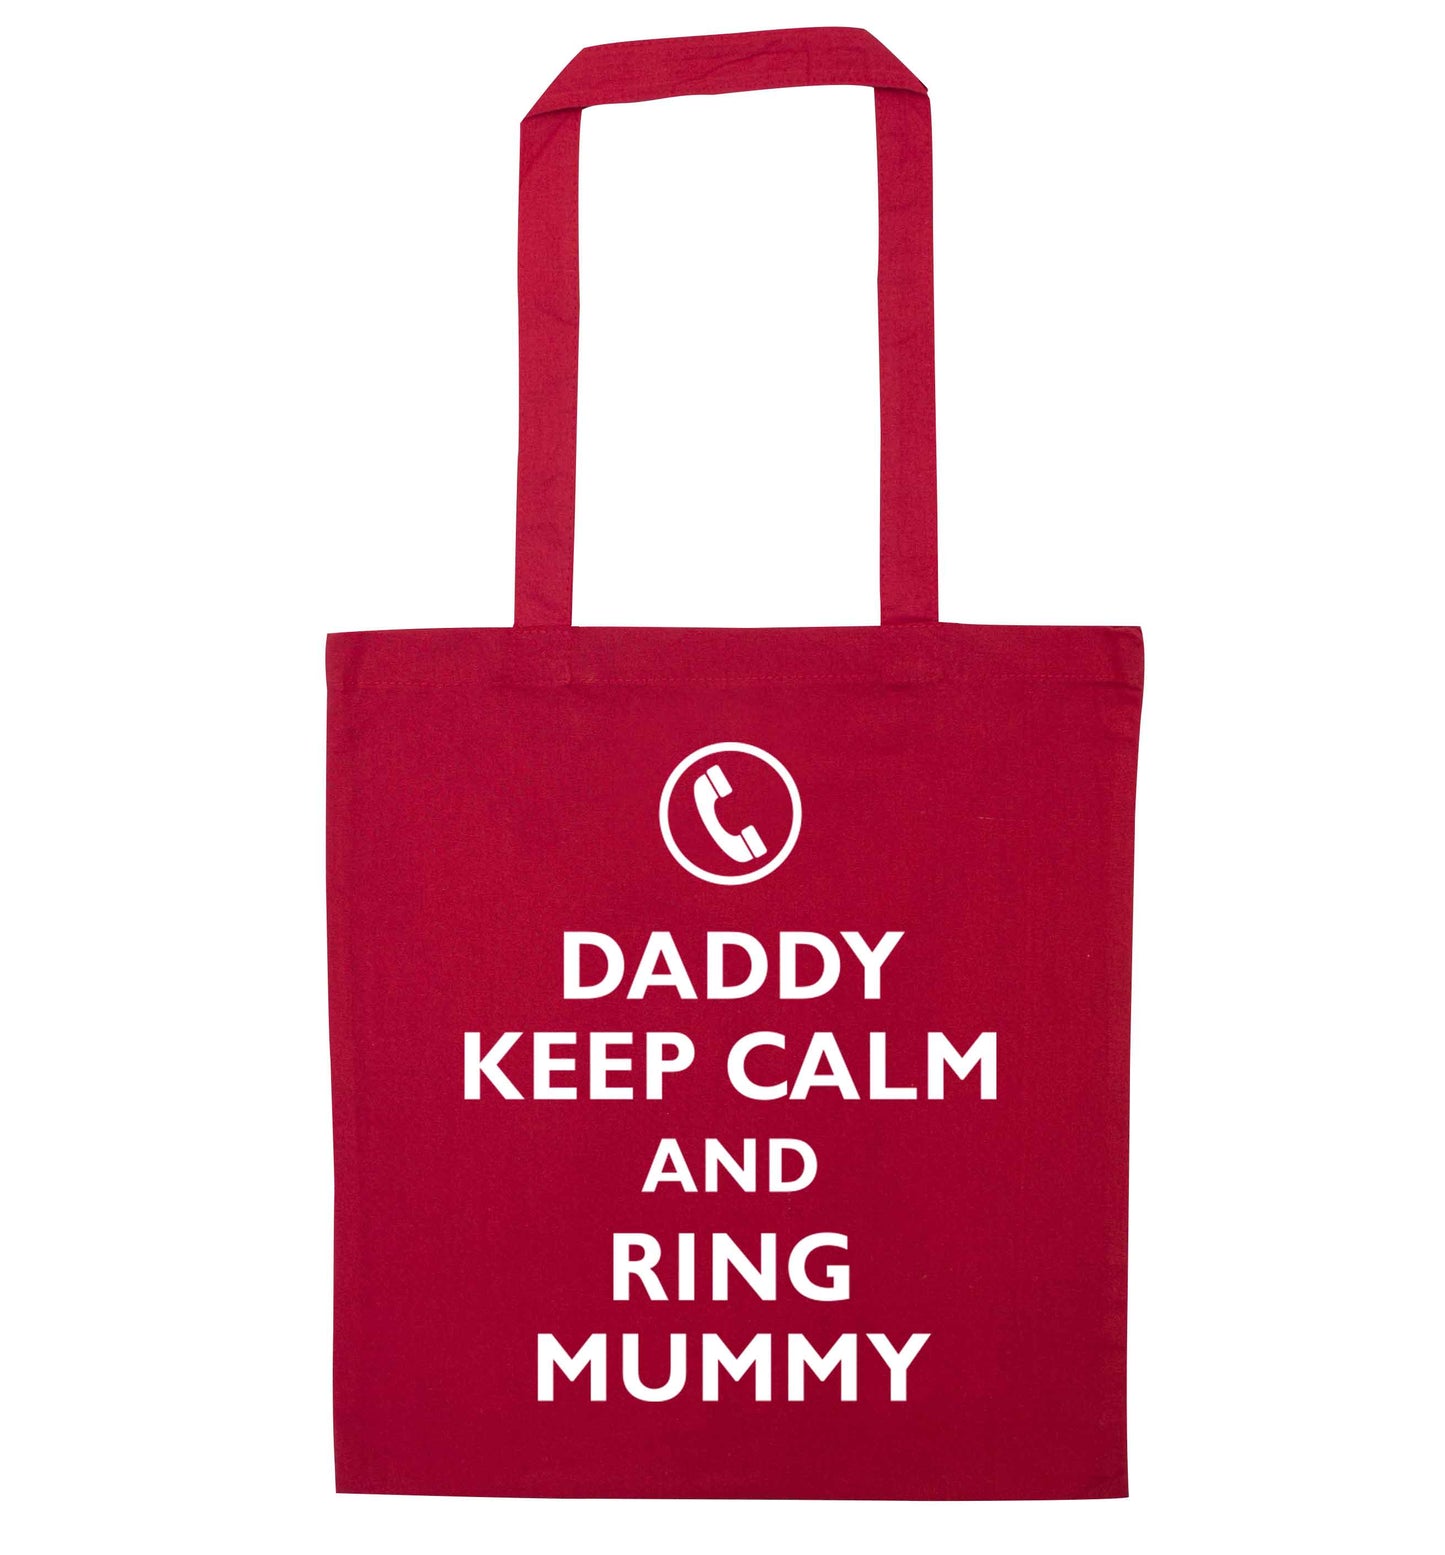 Daddy keep calm and ring mummy red tote bag